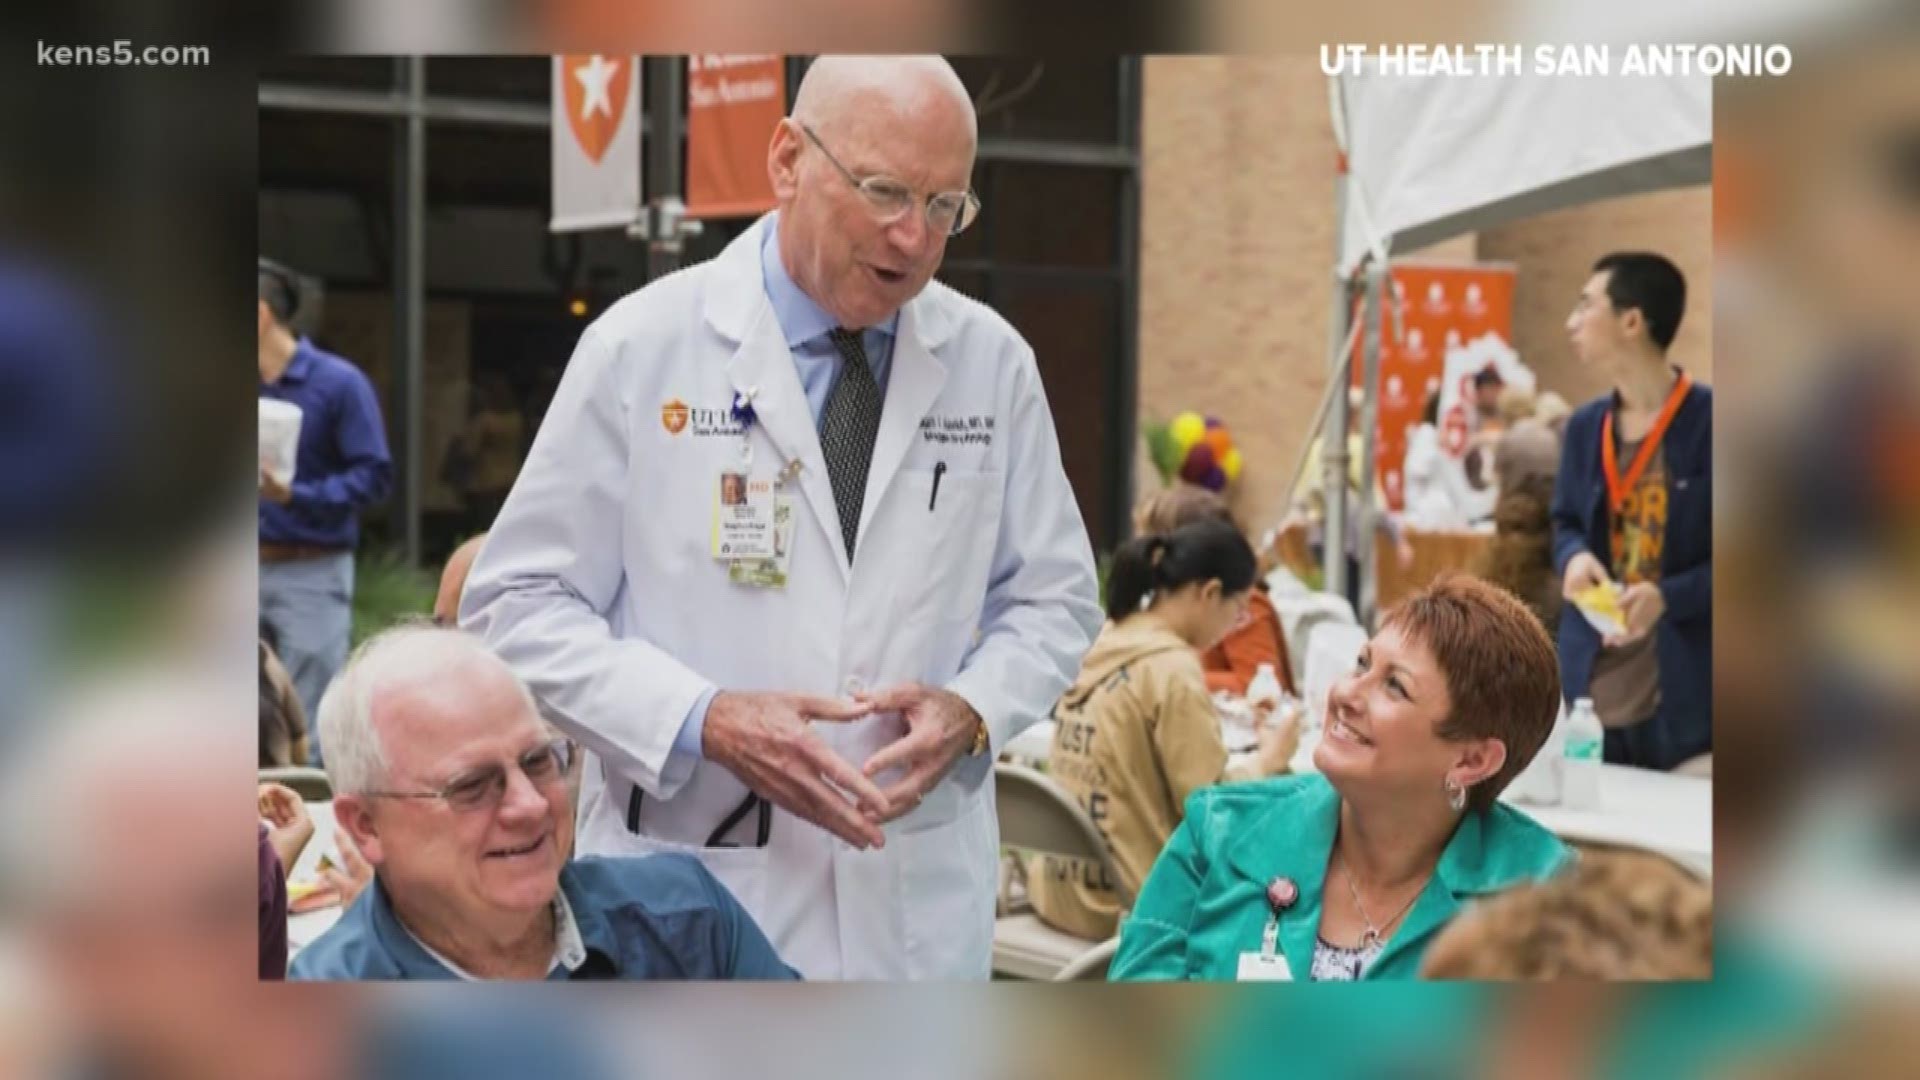 As the Texas population increases, health care systems have to match the growth. UT Health San Antonio's Dr. Fred Campbell has served on the medical school admissions committee for more than 20 years. He shares why promoting diversity in healthcare matters for patients.